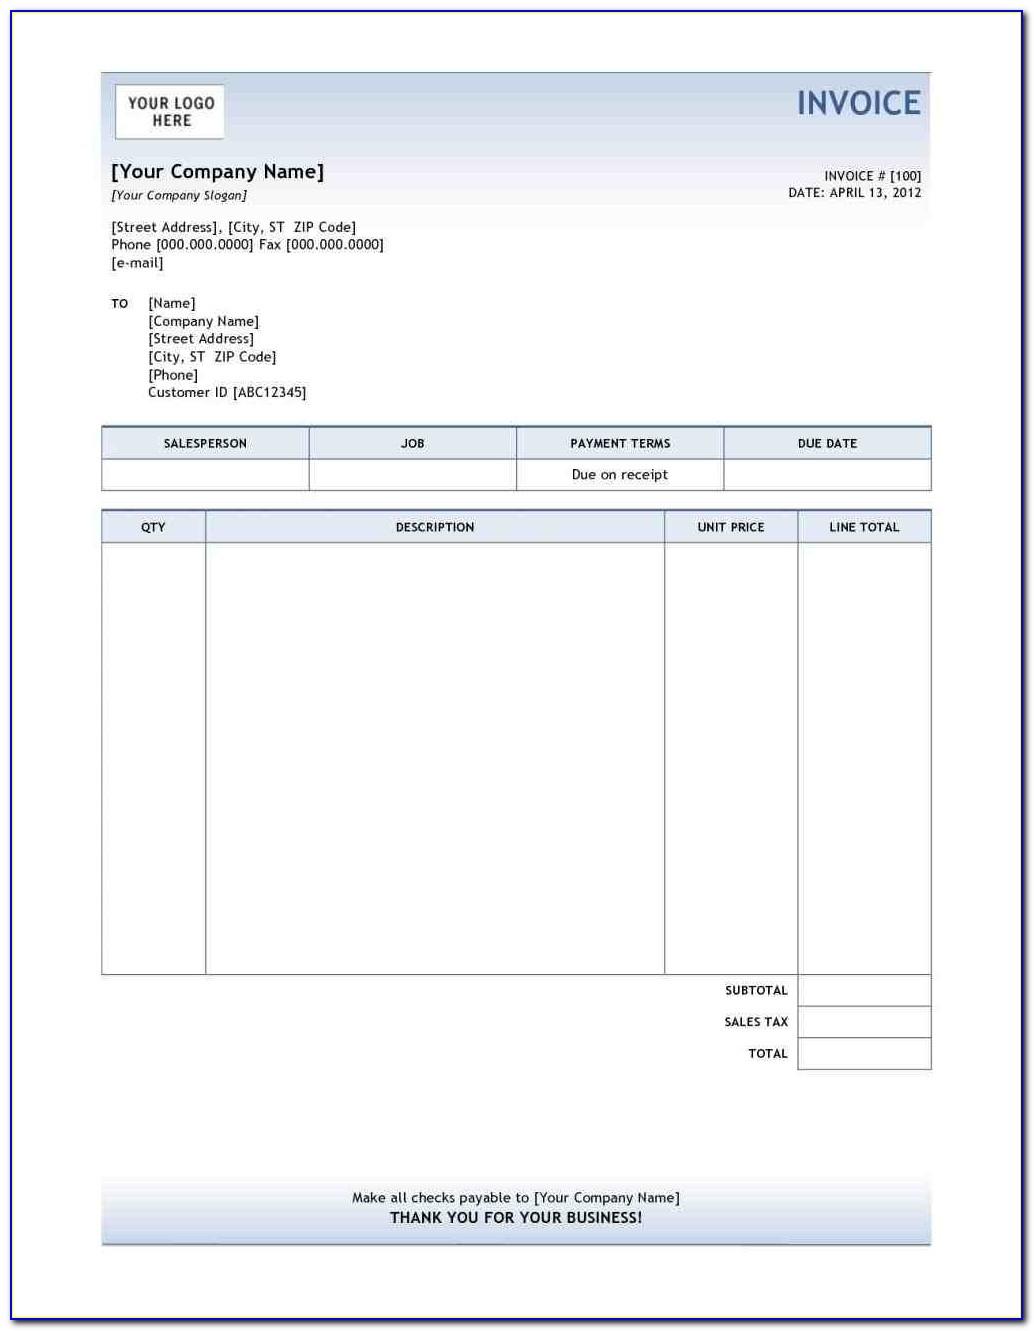 Invoice Format In Word Free Download Indian Invoices Resume Examples LjkrdE7p5l